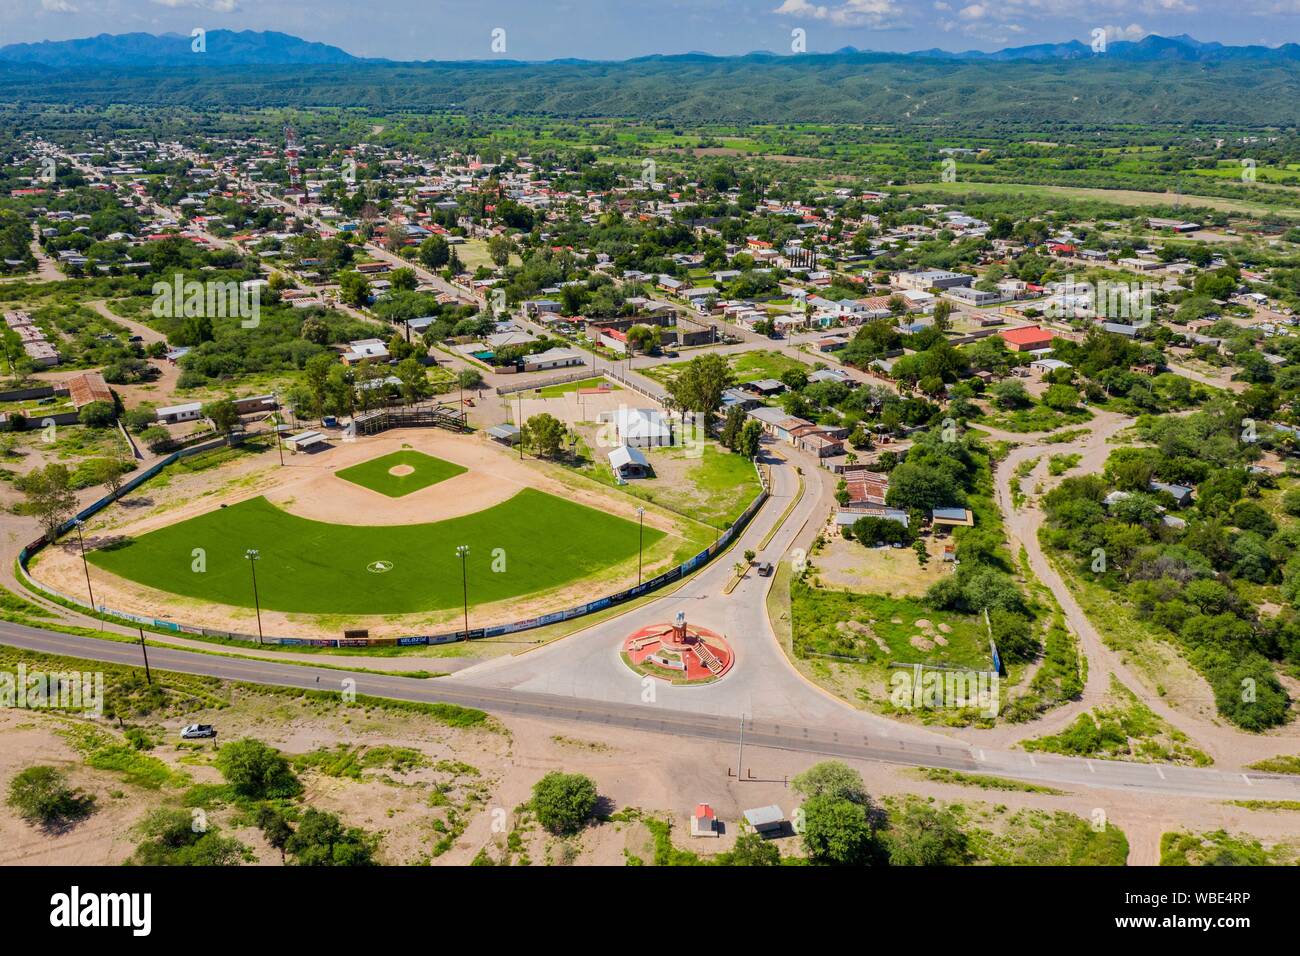 Aerial view of the statue or monument of the famous horse, El Moro de Cumpas and baseball stadium at the entrance of the town of Cumpas, Sonora, Mexico. Route of the Sierra in Sonora Mexico. located in the lower region of the Sierra Madre Occidente. It was founded in 1643 by the Jesuit missionary Egidio Monteffio under the name of Our Lady of the Assumption of Cumpas, with the purpose of evangelizing the Opal tribes that inhabited that place in the previous times and during the conquest.  (© Photo: LuisGutierrez / NortePhoto.com)  Vista aerea de la estatua o monumento del famoso caballo , El M Stock Photo